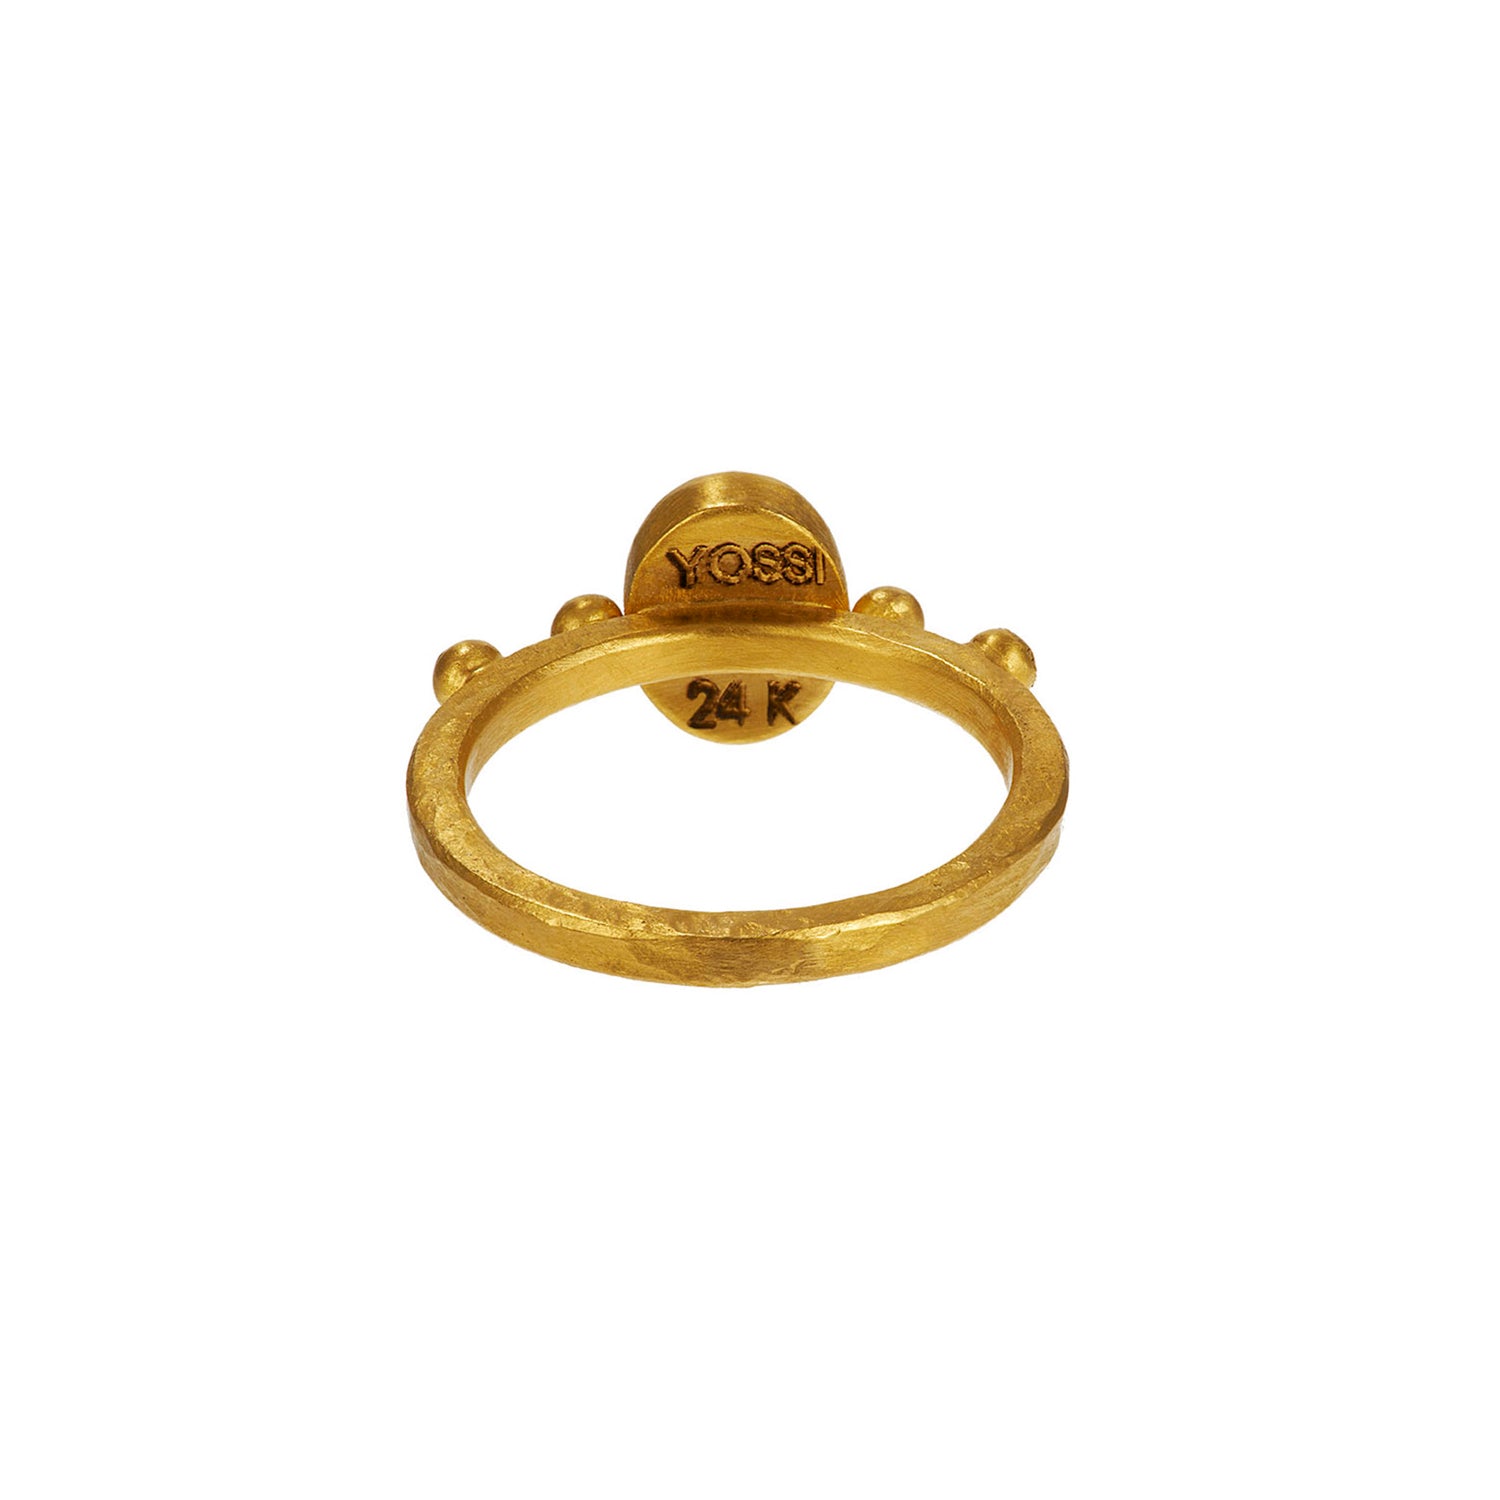 Buy Pure Gold 24K Gold Solid Sparkle Ring, Au999 Gold, 99% of Gold, Real K  Gold 4MM Wide Ring Online in India - Etsy